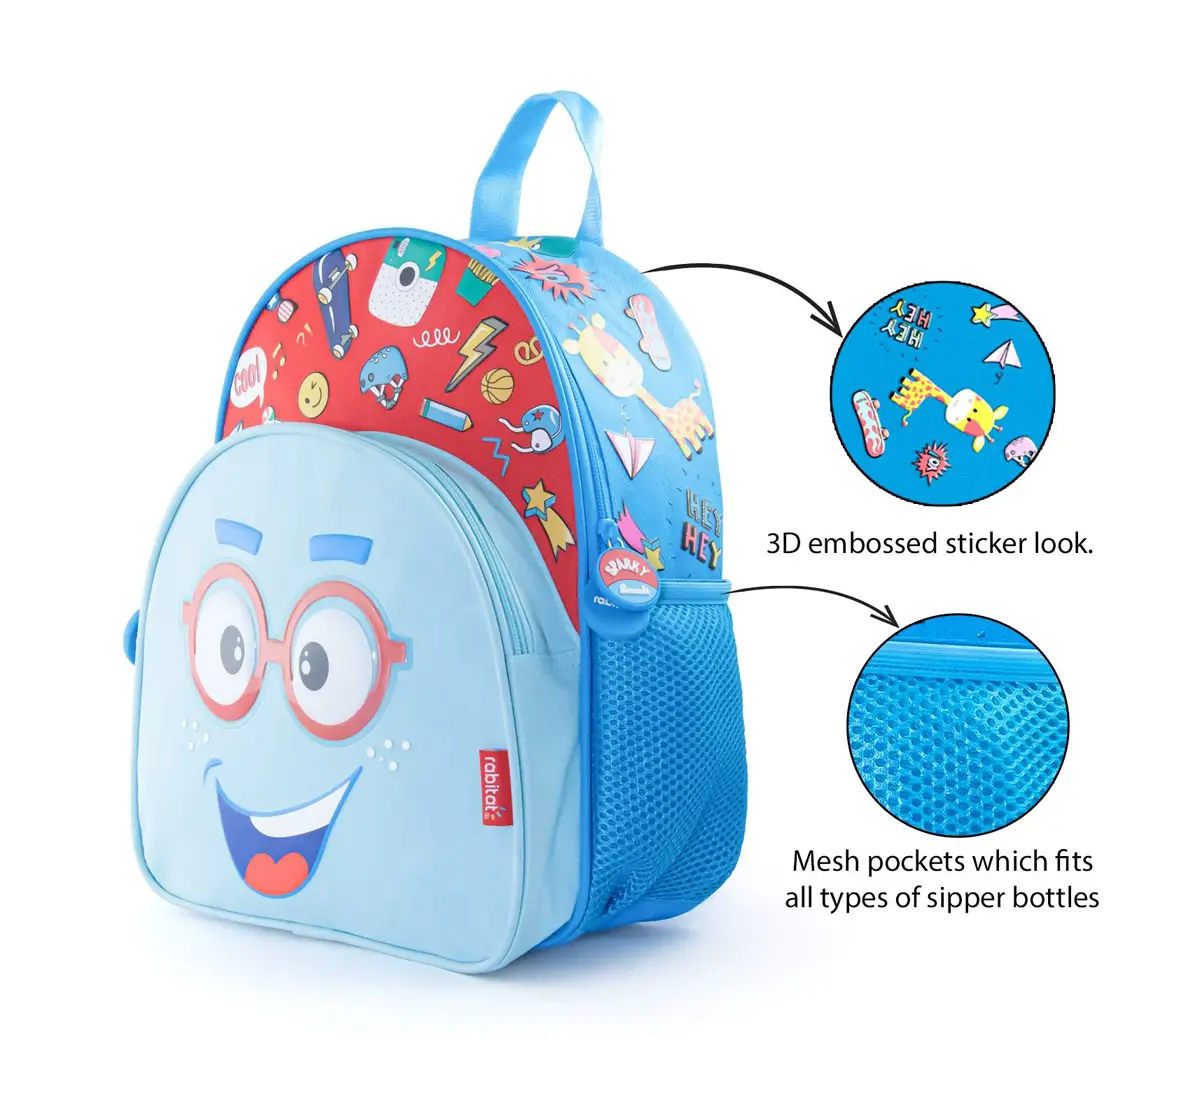 Rabitat Smash School Bag Sparky 12 Inches For Kids of Age 2Y+, Multicolour